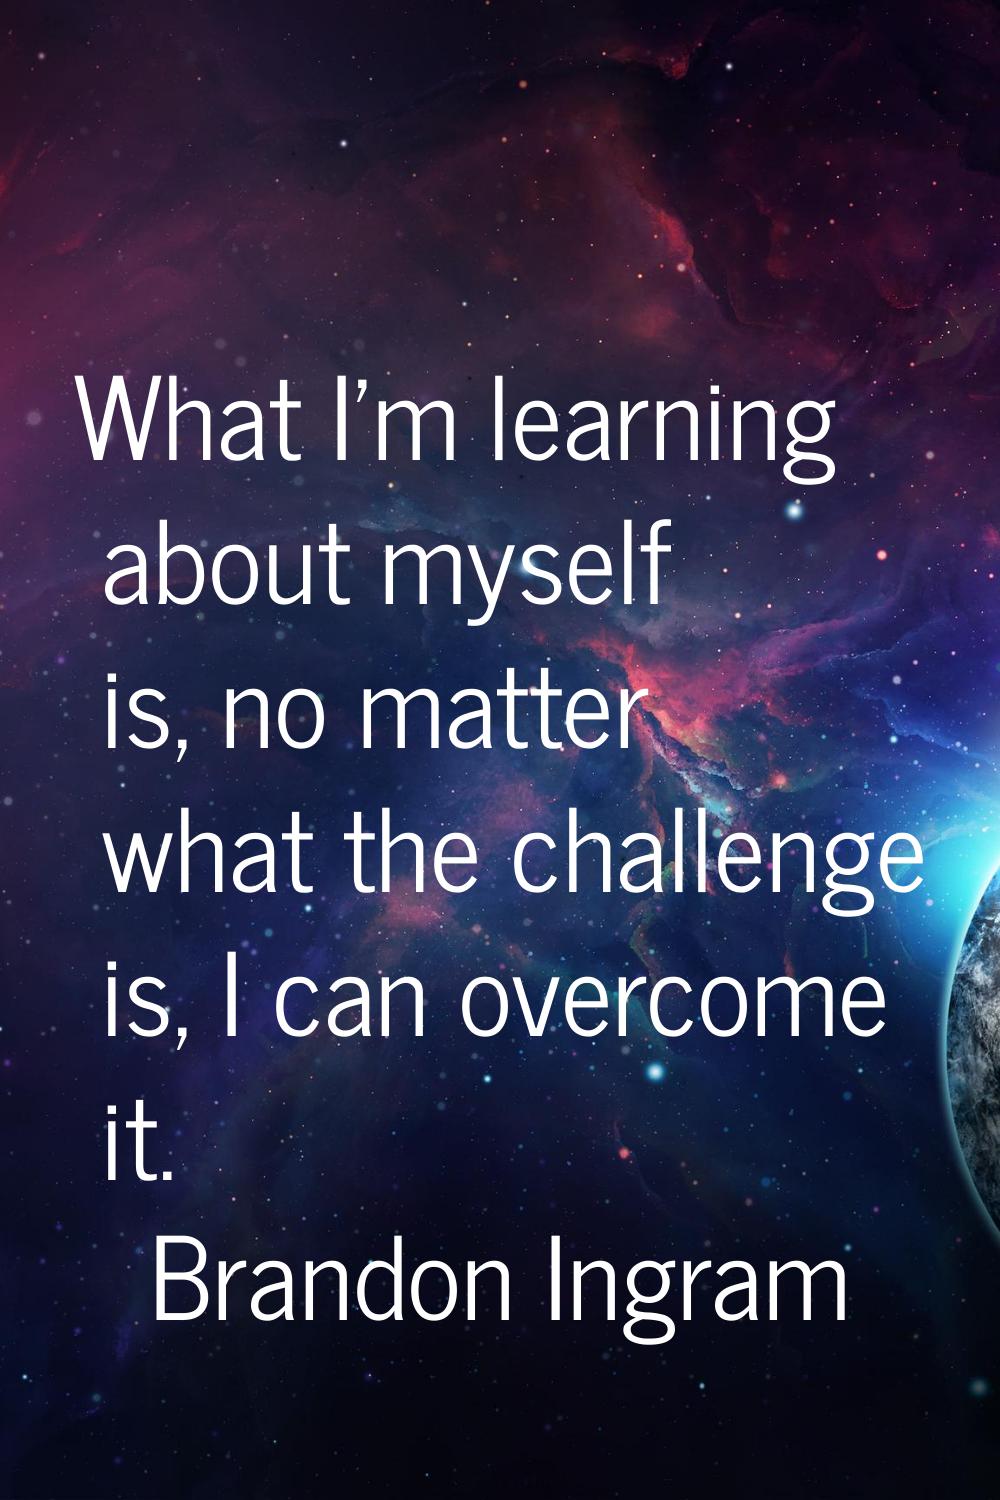 What I'm learning about myself is, no matter what the challenge is, I can overcome it.